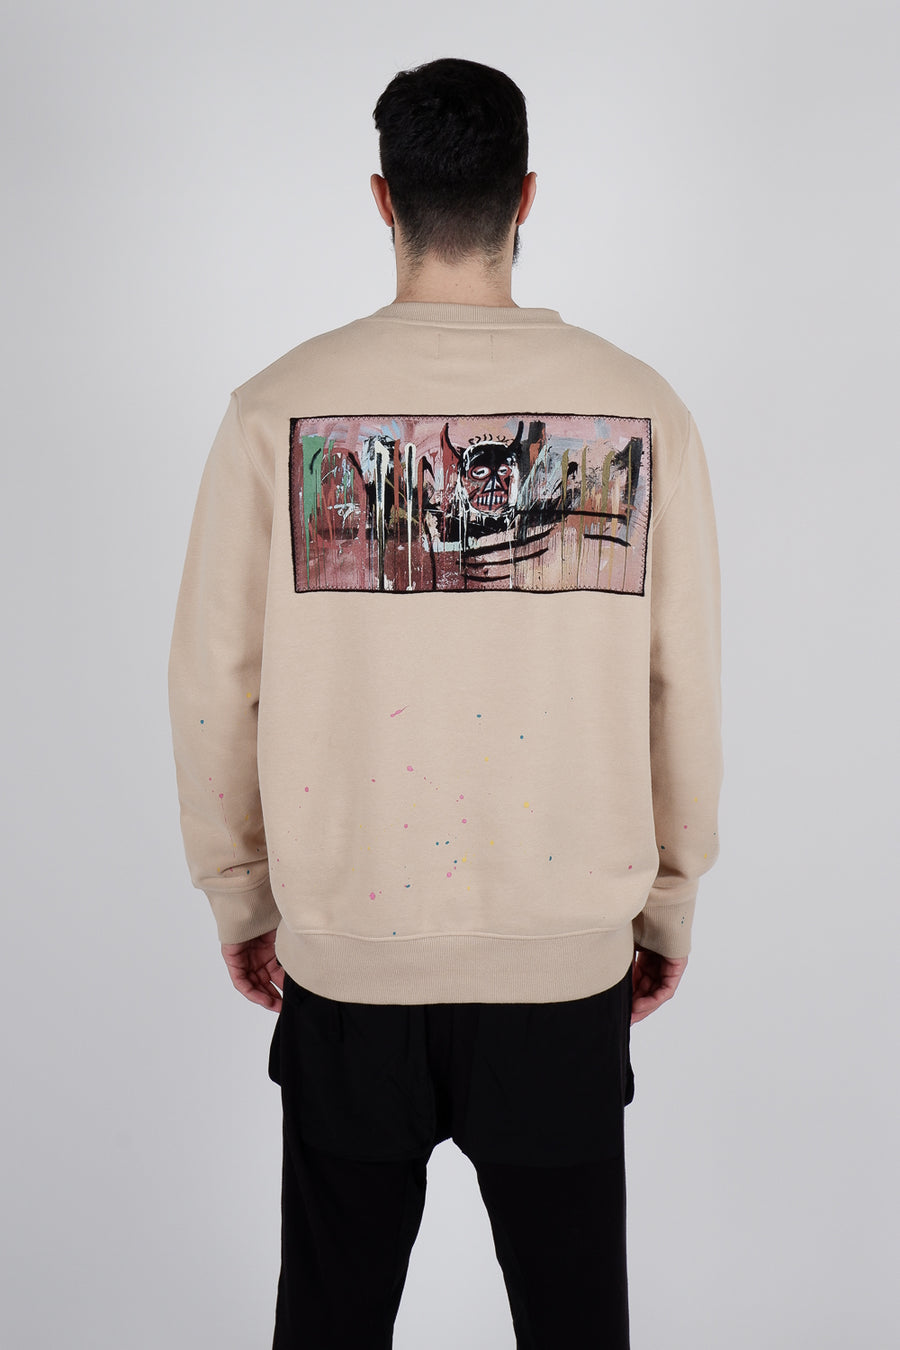 Buy the ABE Basquiat Devil Sweatshirt Beige in Black at Intro. Spend £50 for free UK delivery. Official stockists. We ship worldwide.